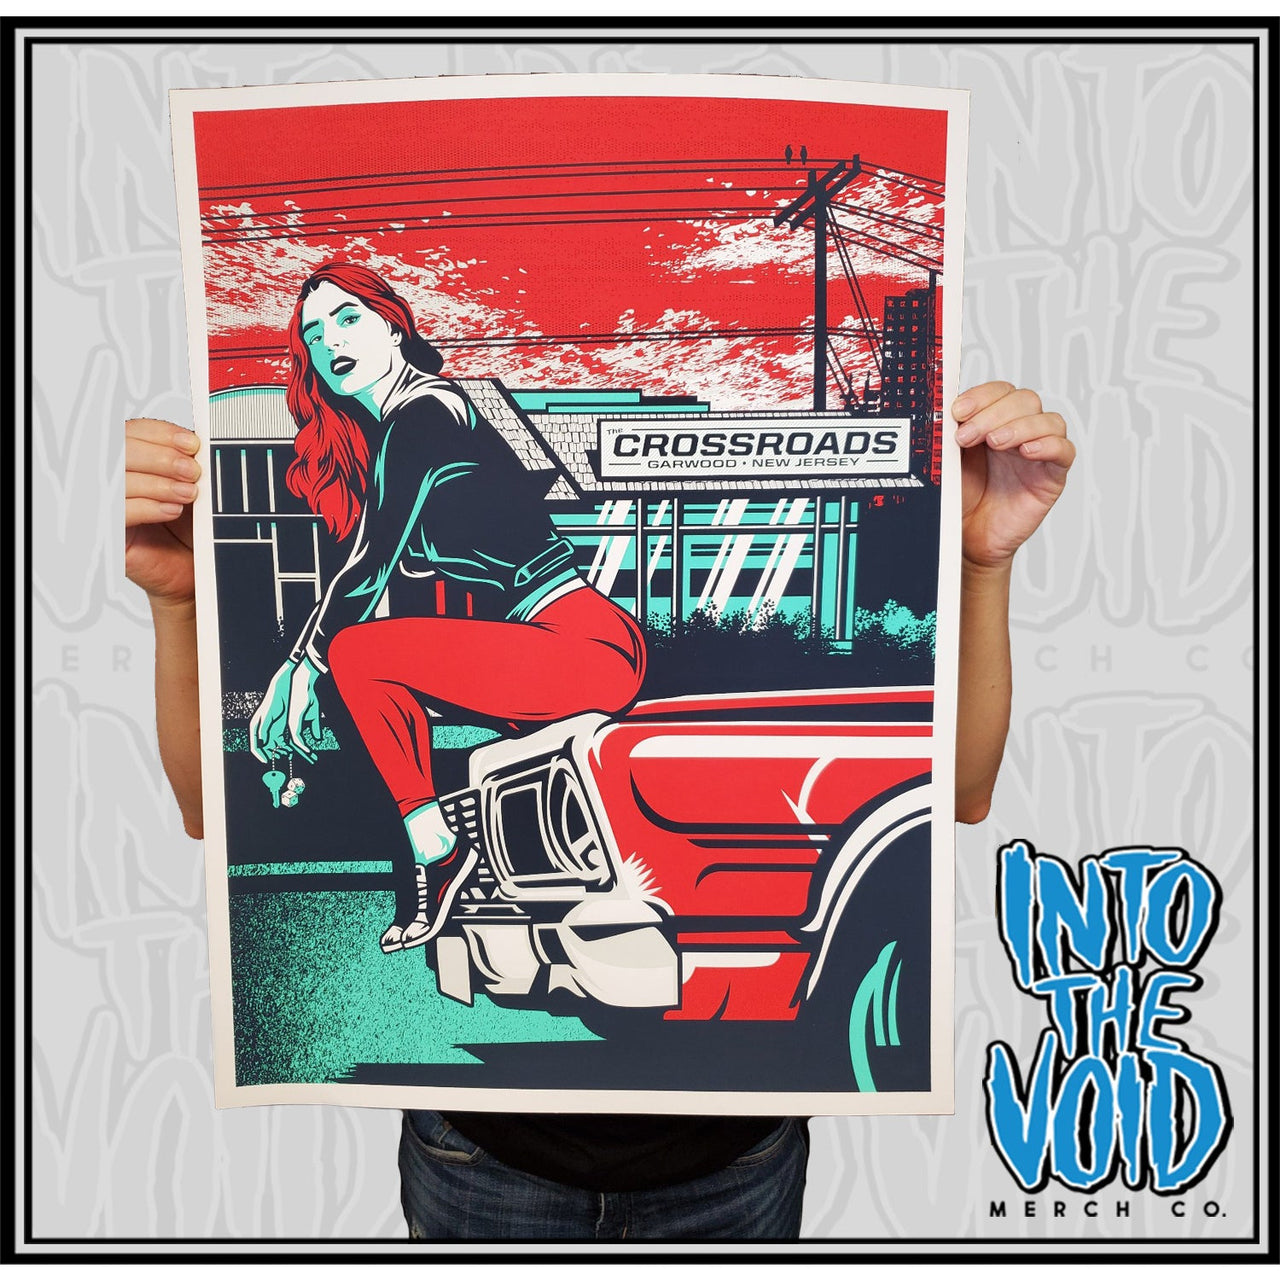 CROSSROADS - EL JEFE - Poster - INTO THE VOID Merch Co.